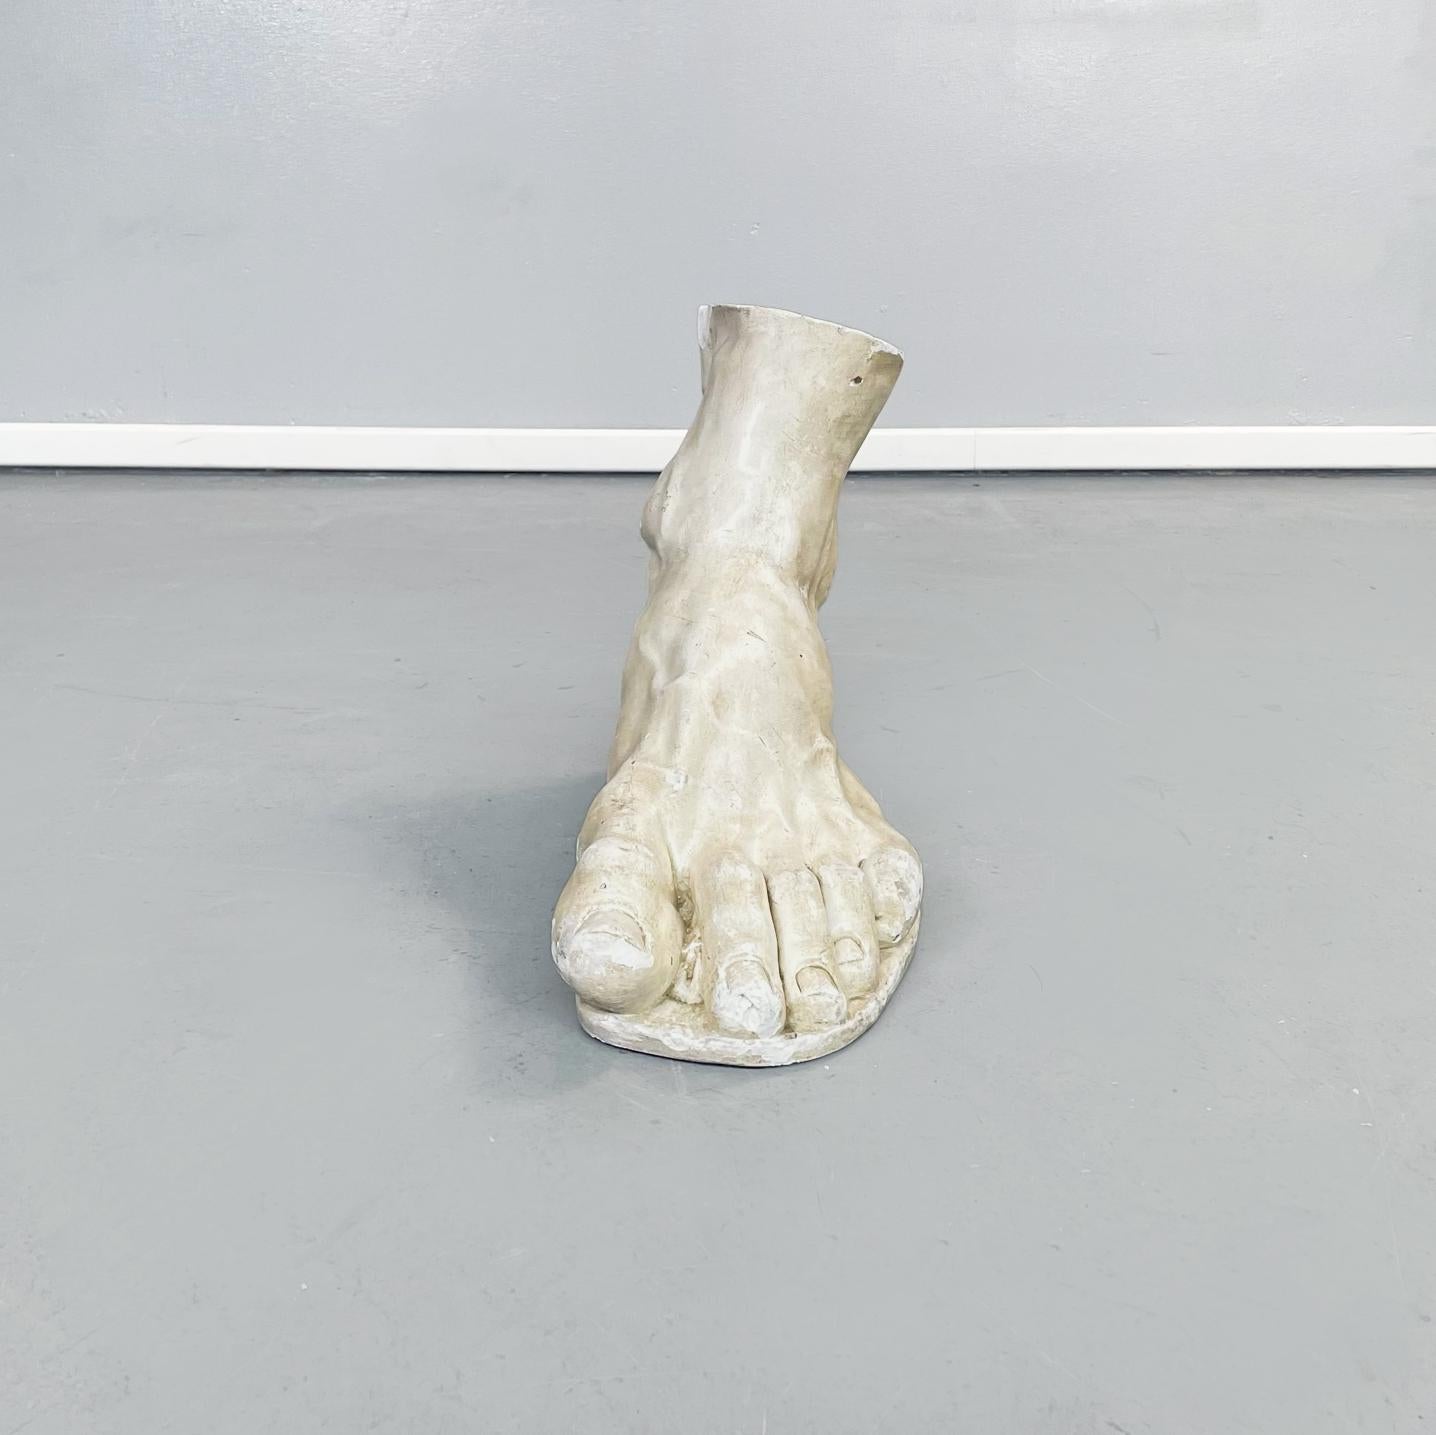 Italian Modern Foot Statue in light withe and beige plaster, 1970s
This is not just a foot this is a piece of art, the statue is create as a stamp or technical prototipe for a school or for an artist lab.
The foot is very big and decorative, all the